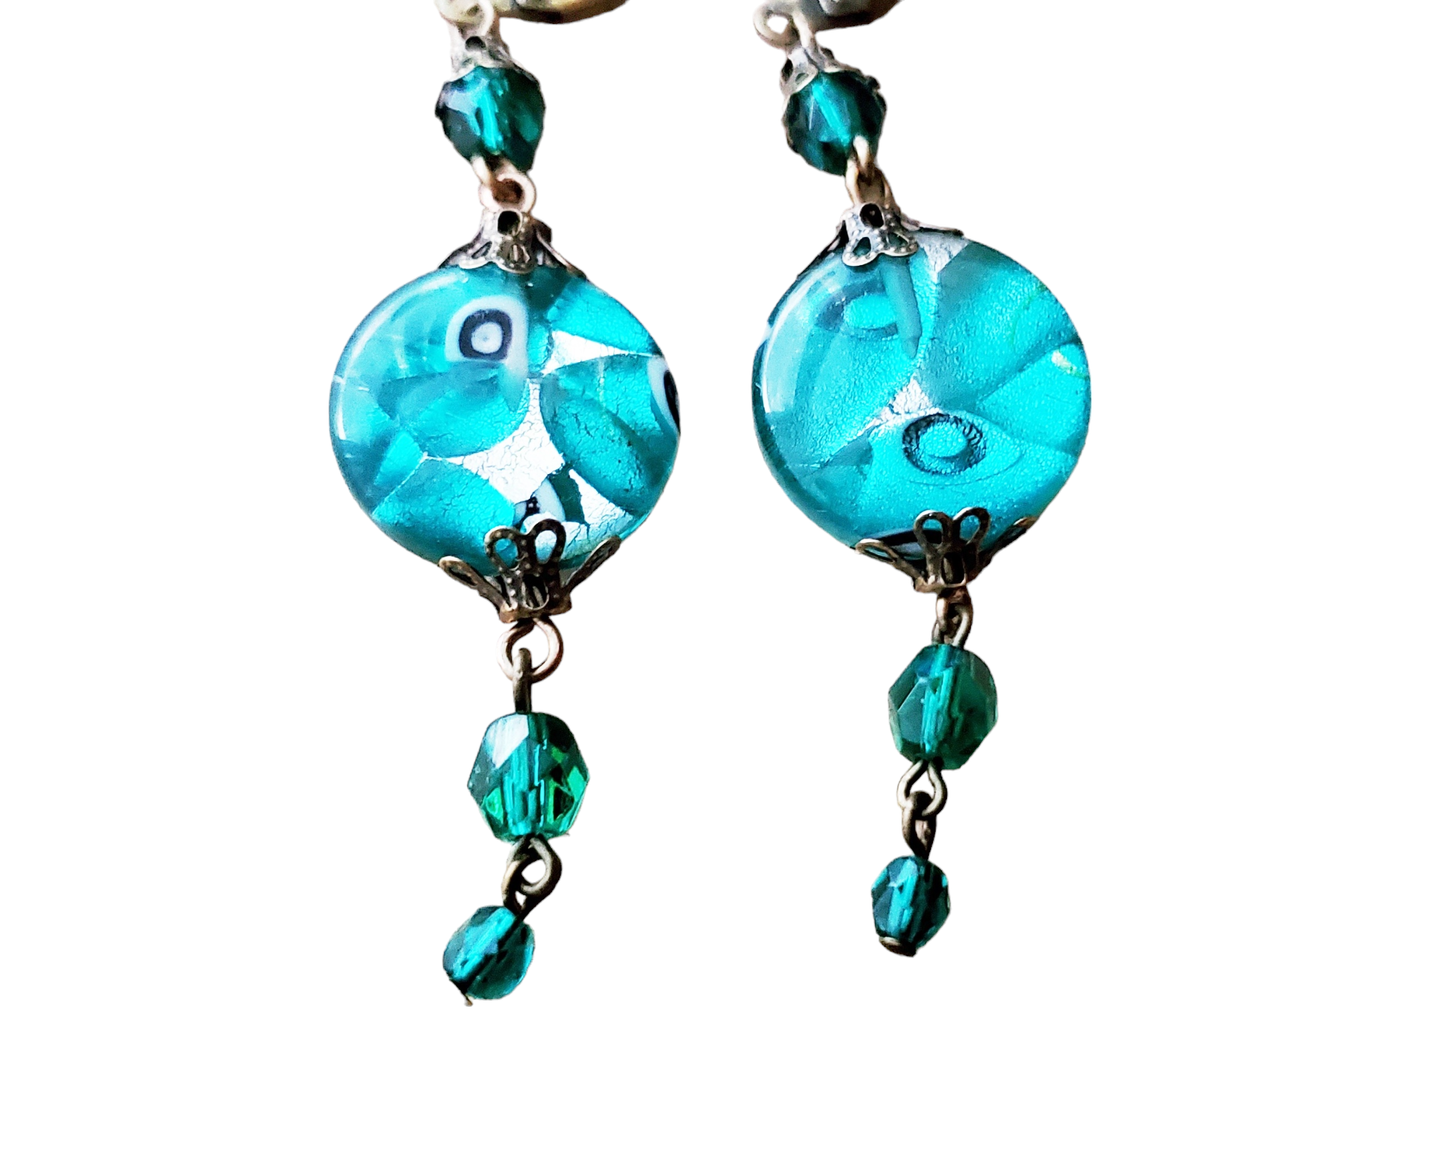 Long Luminous Teal foil Glass Earrings with sparkly crystal glass beads with antiqued brass metal and leaver back earring hooks.